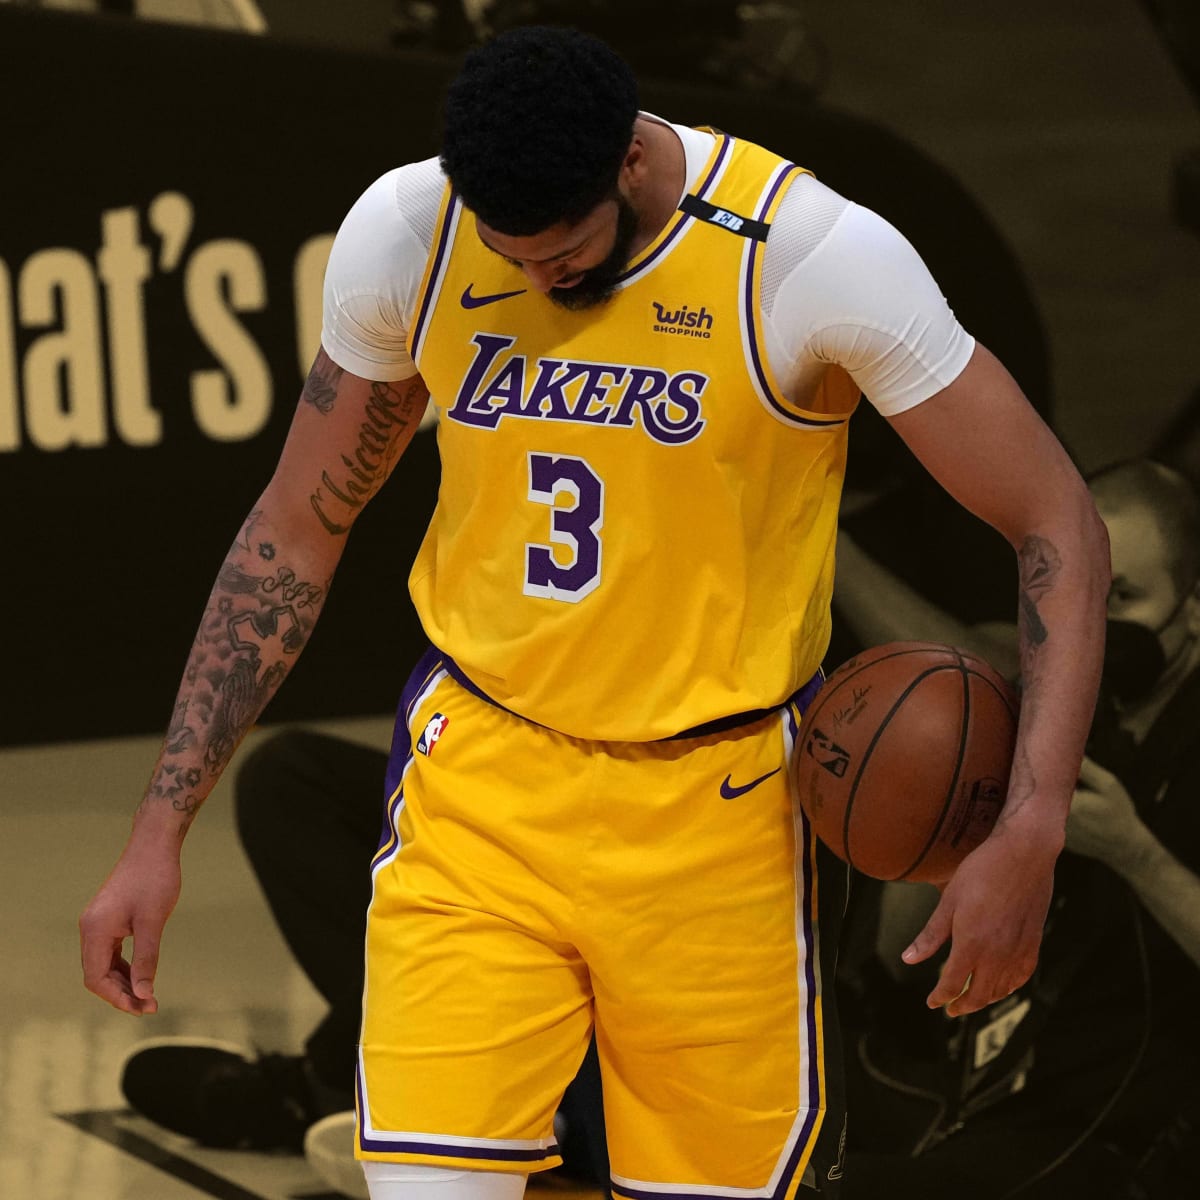 Davis 'probable' for Lakers-Nets following MCL sprain